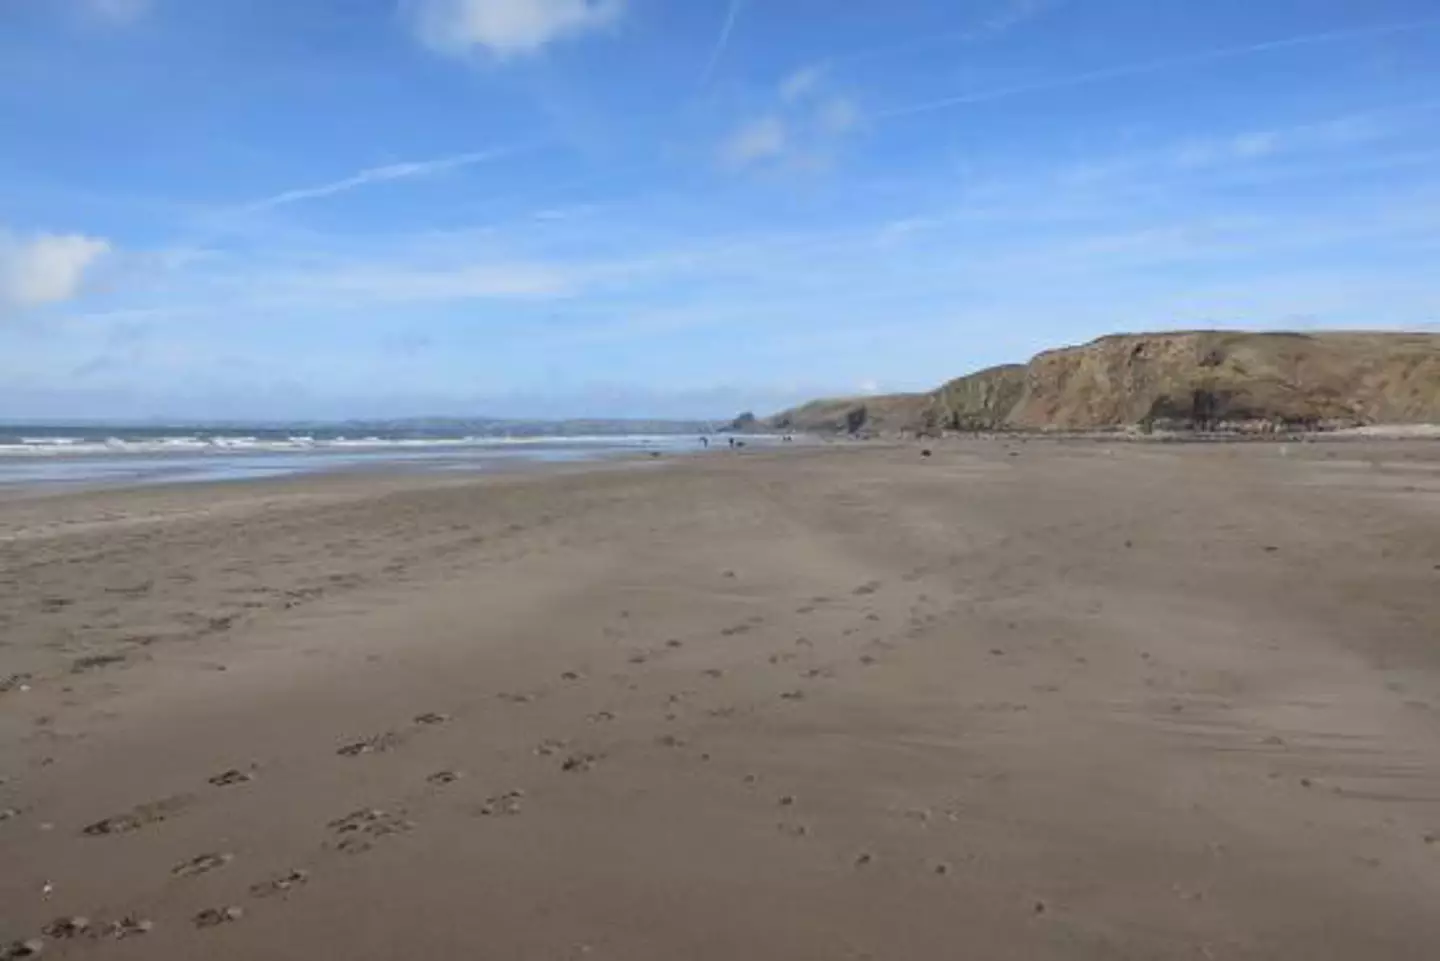 The incident took place on Druidston Haven beach (